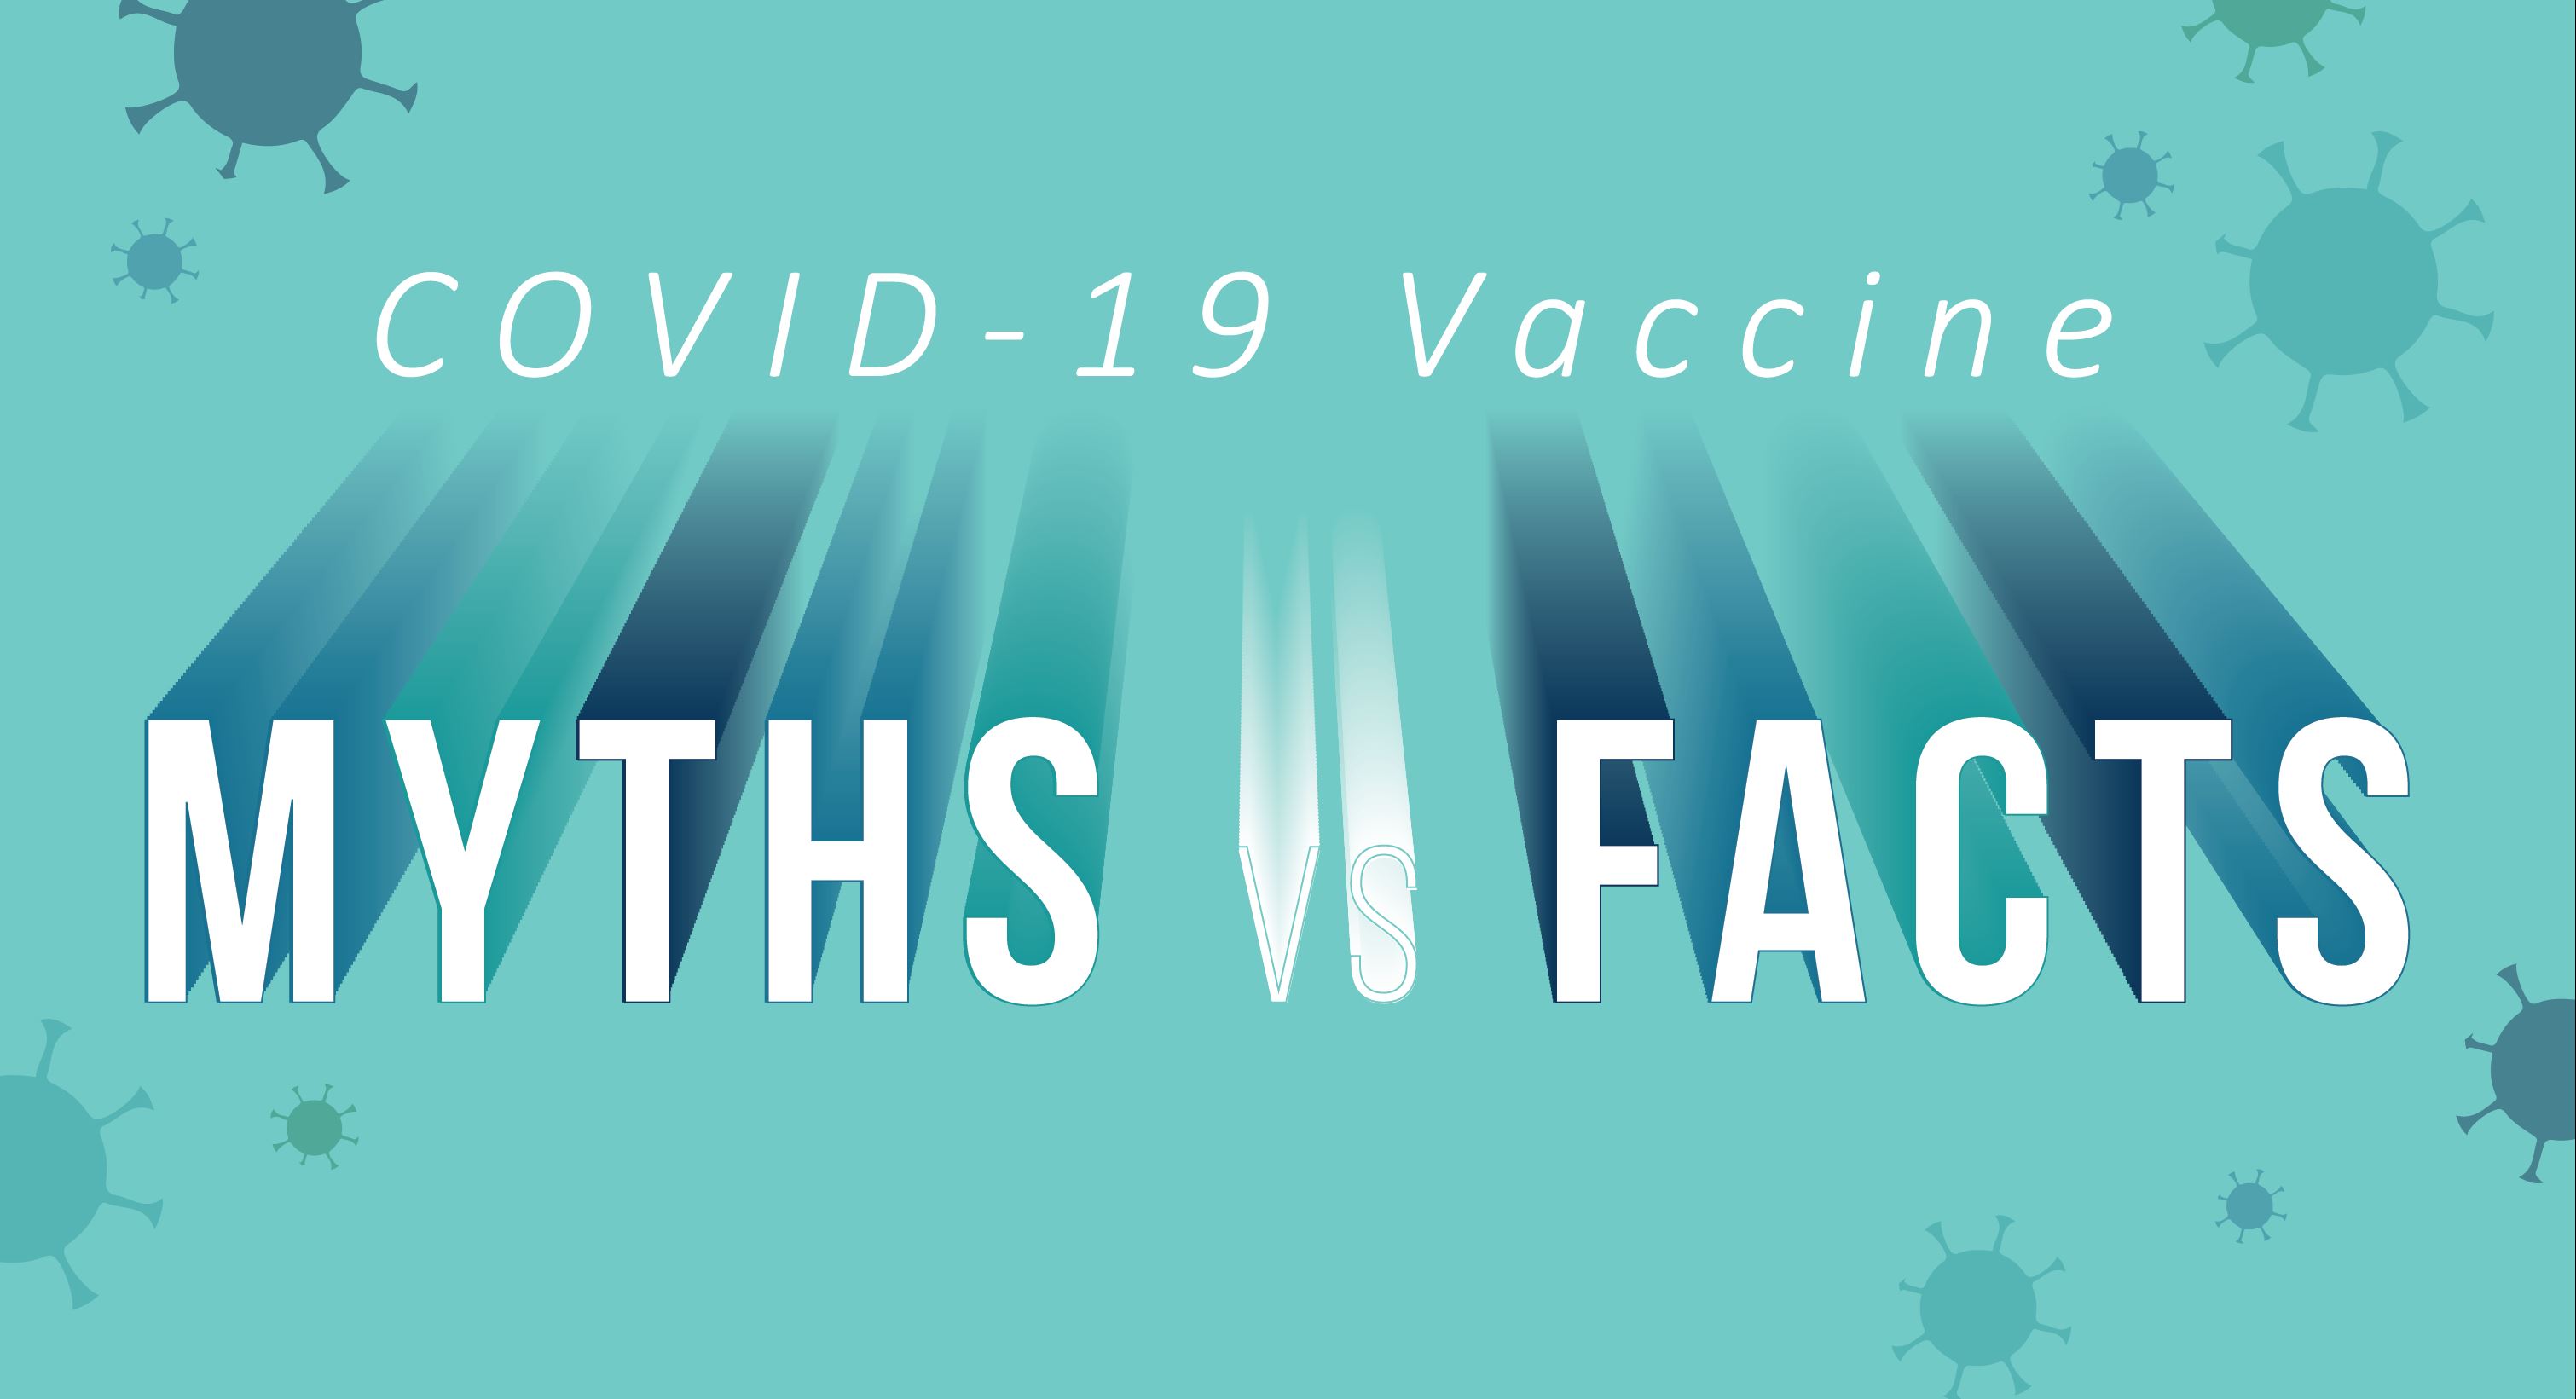 COVID-19 Vaccine Myths and facts